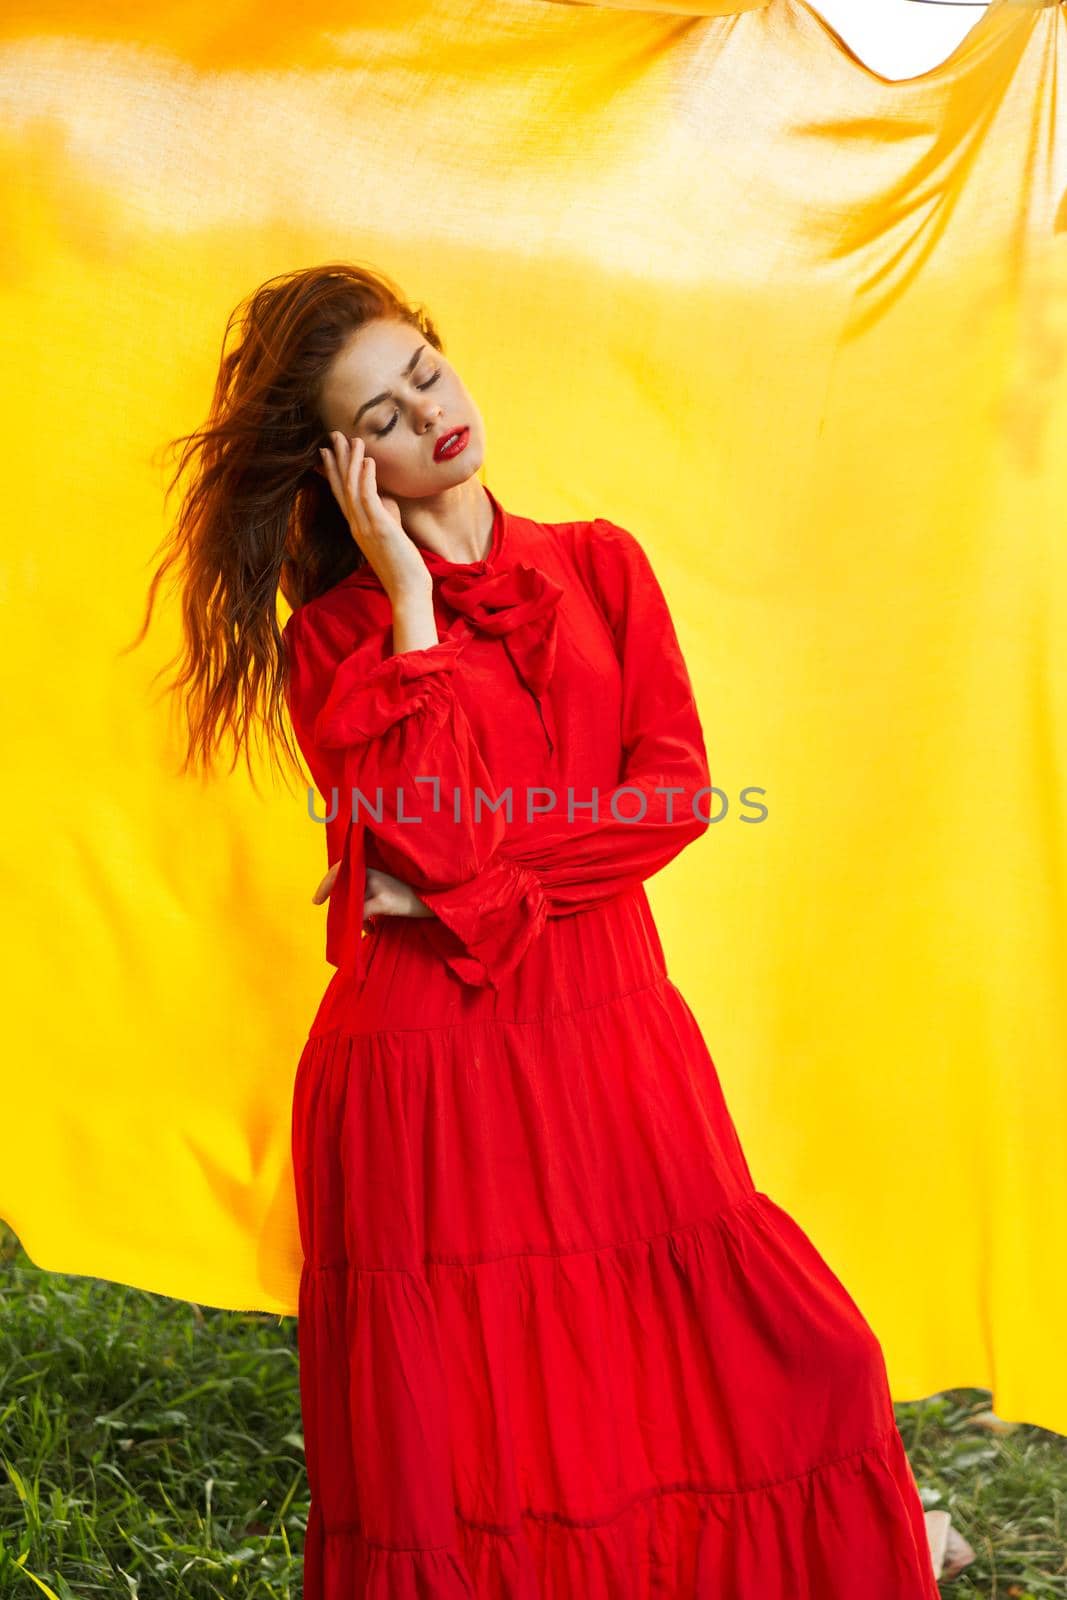 pretty woman in red dress yellow fabric on nature background by Vichizh